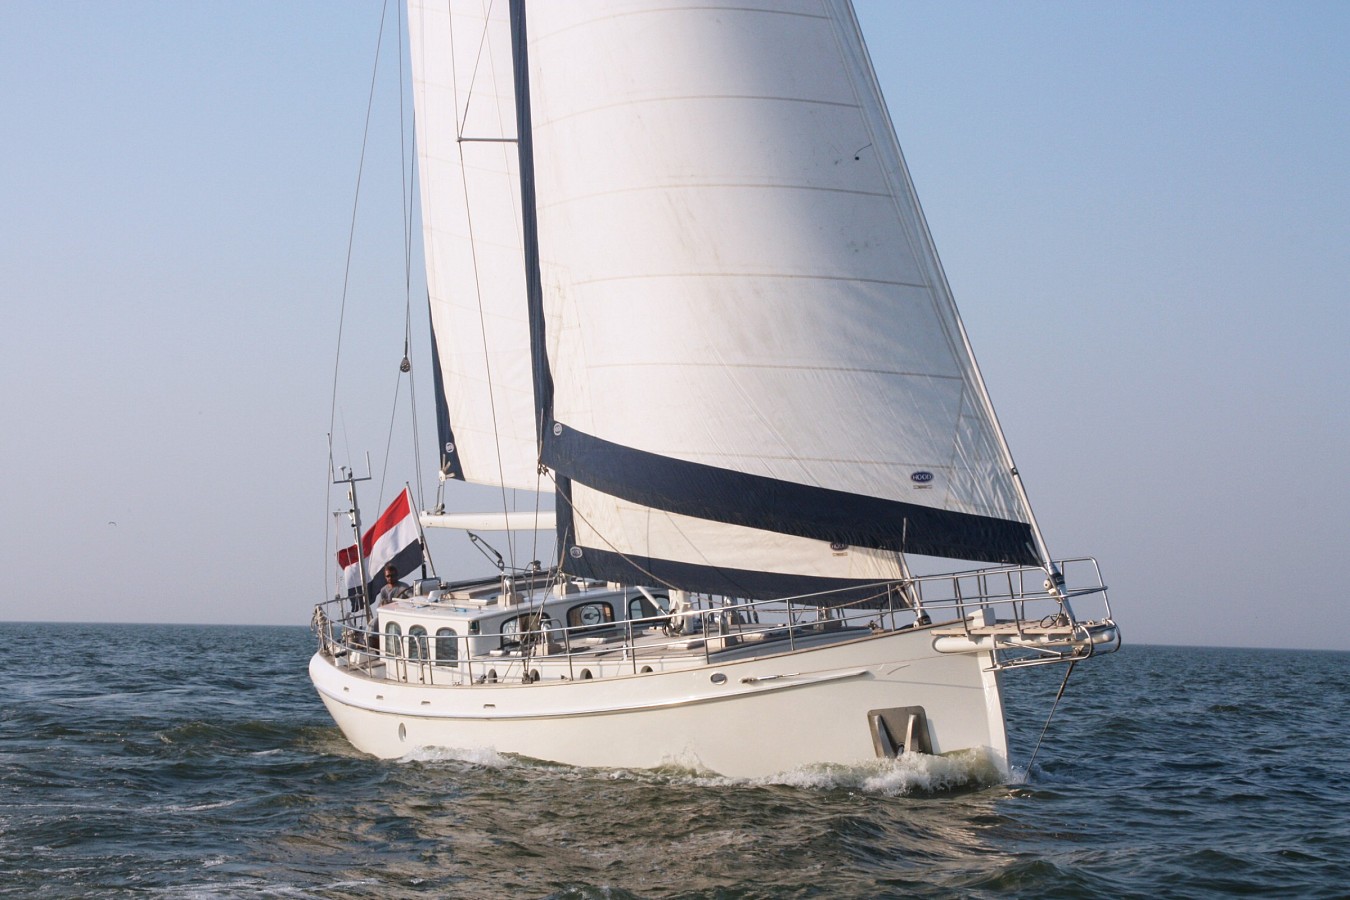 Puffin 50 for sail